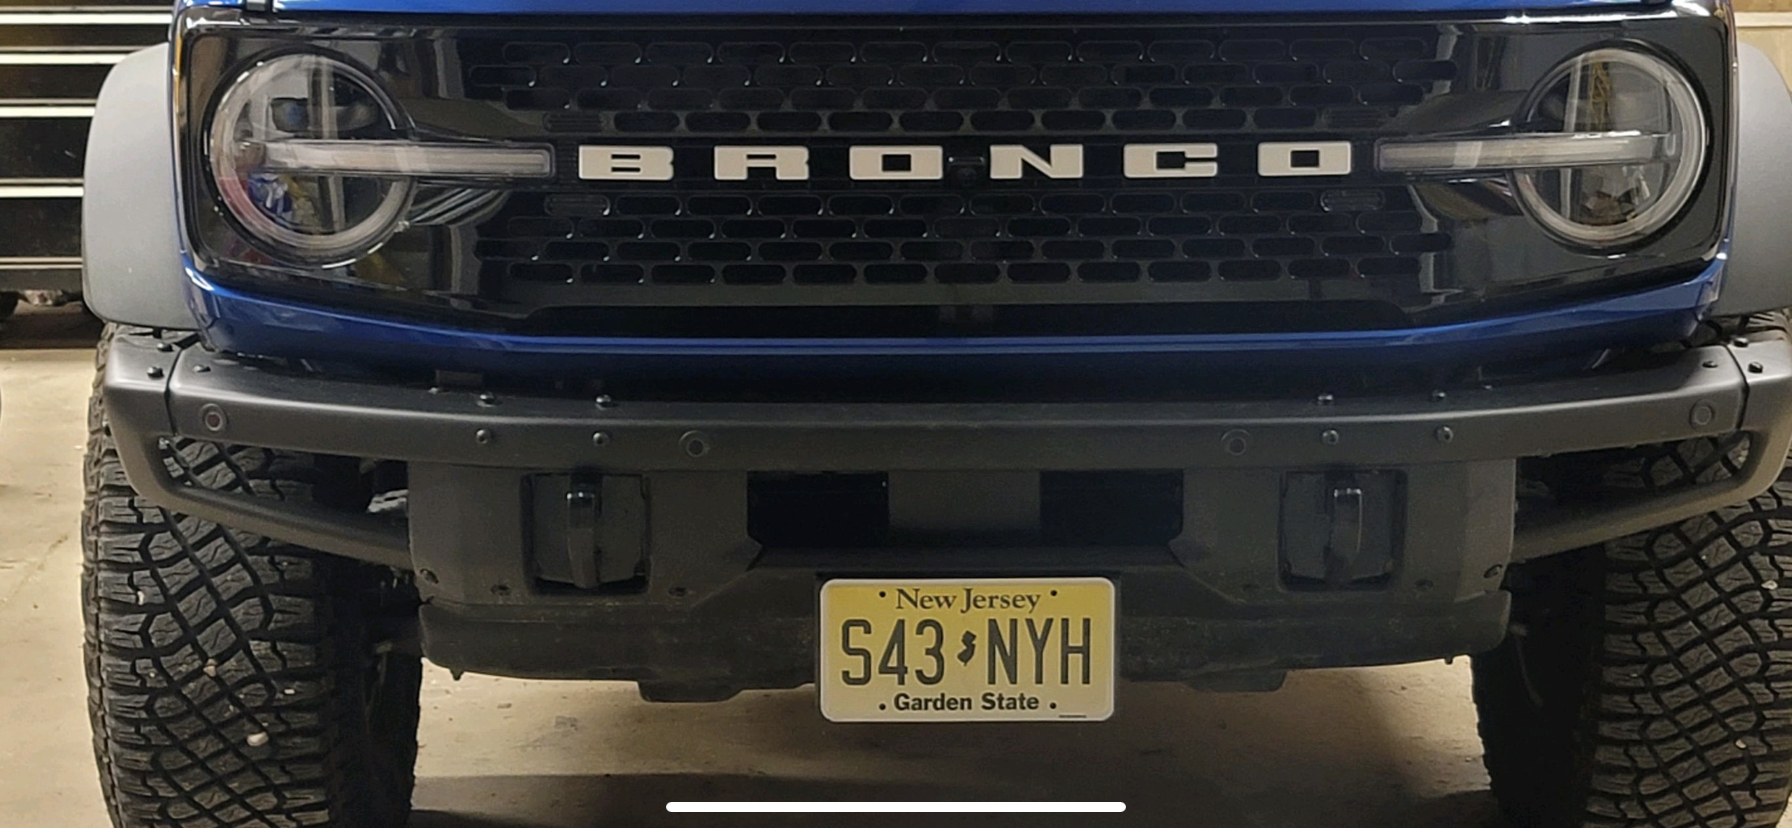 Ford Bronco PRICE DROP - Finally a Front License Plate bracket solution - order yours today 9AEC5FE7-A059-426F-97E3-B247FEDD19B5